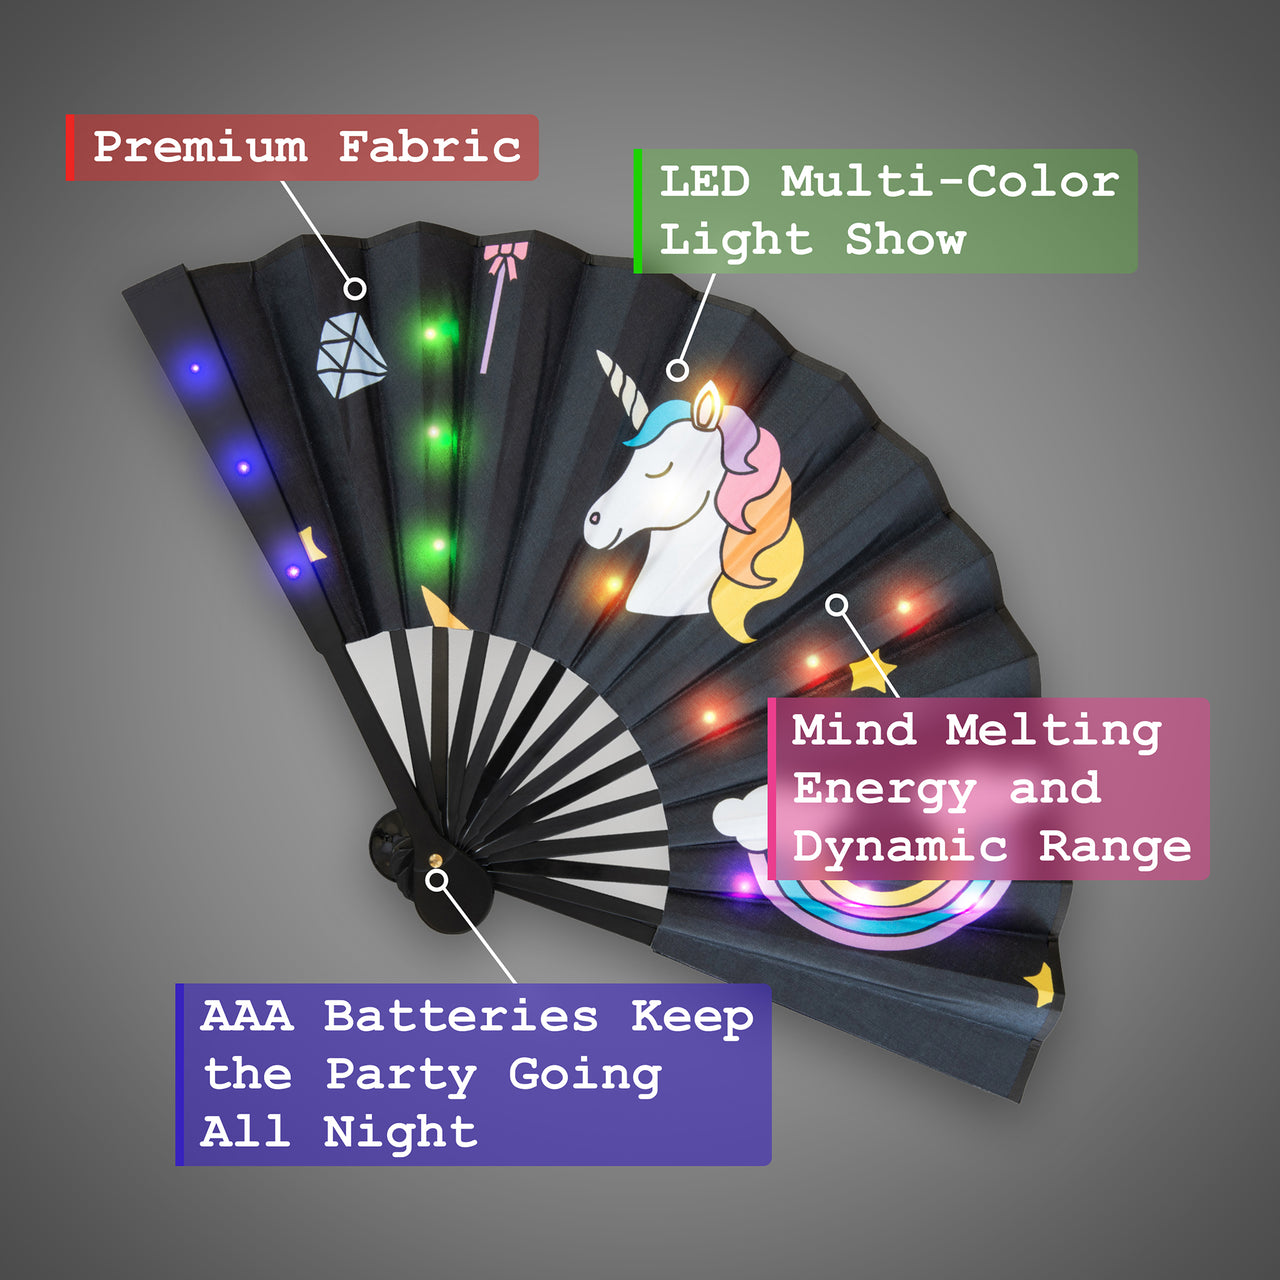 LED Hand Fan - "Magical Unicorn" - Foldable Hand Fan to Stay Cool While Dancing the Night Away